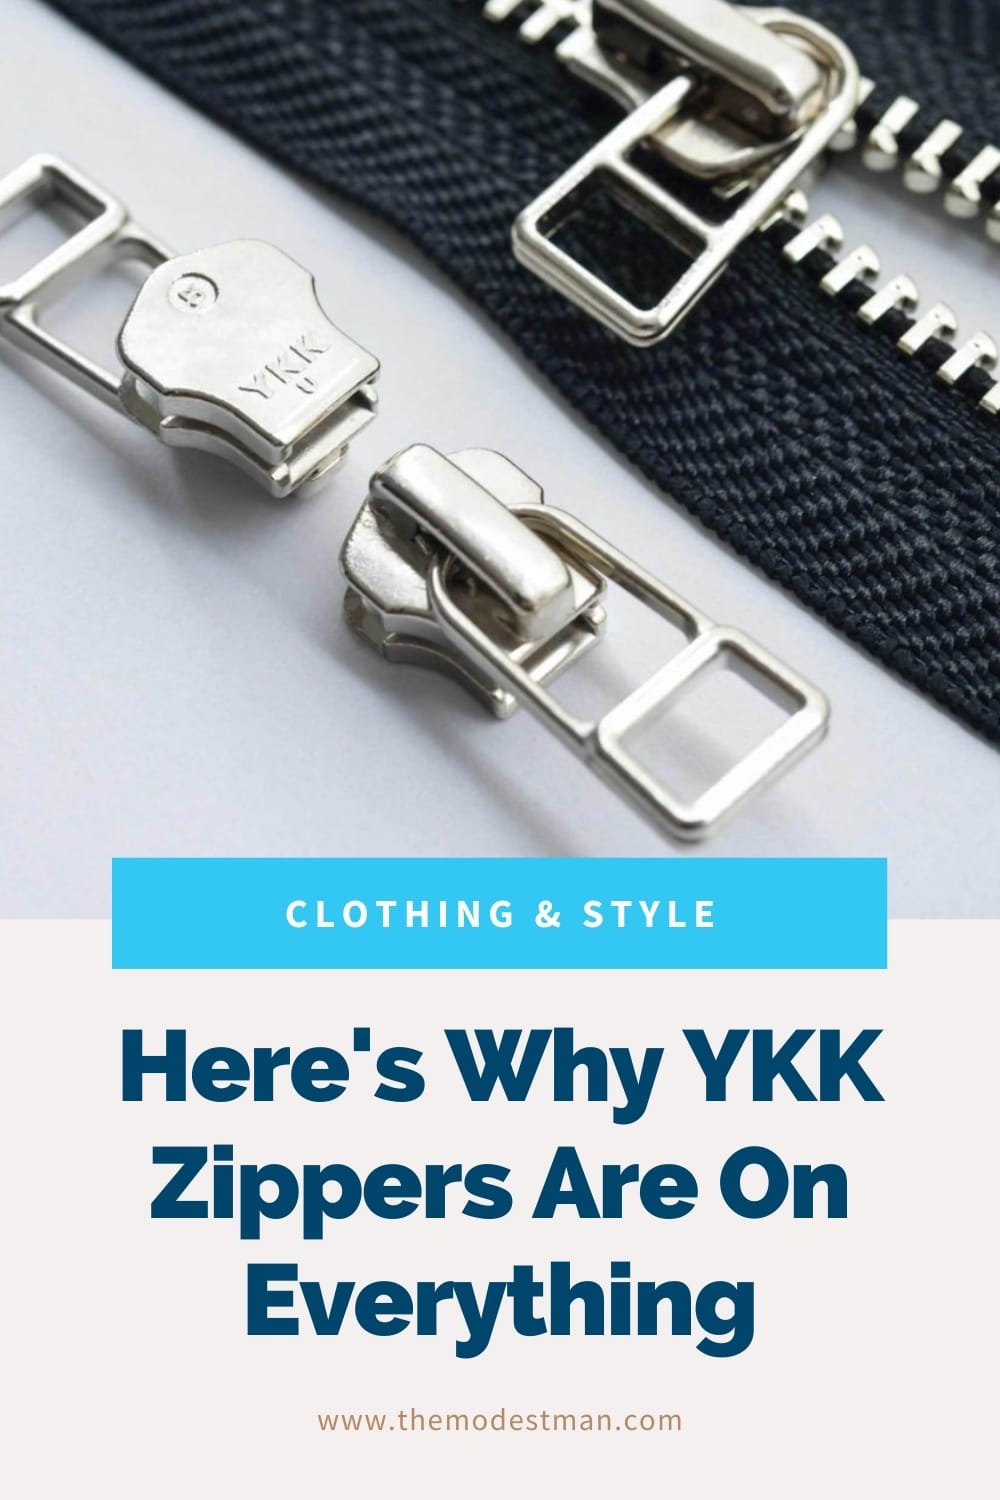 Here's Why YKK Zippers Are On Everything - The Modest Man